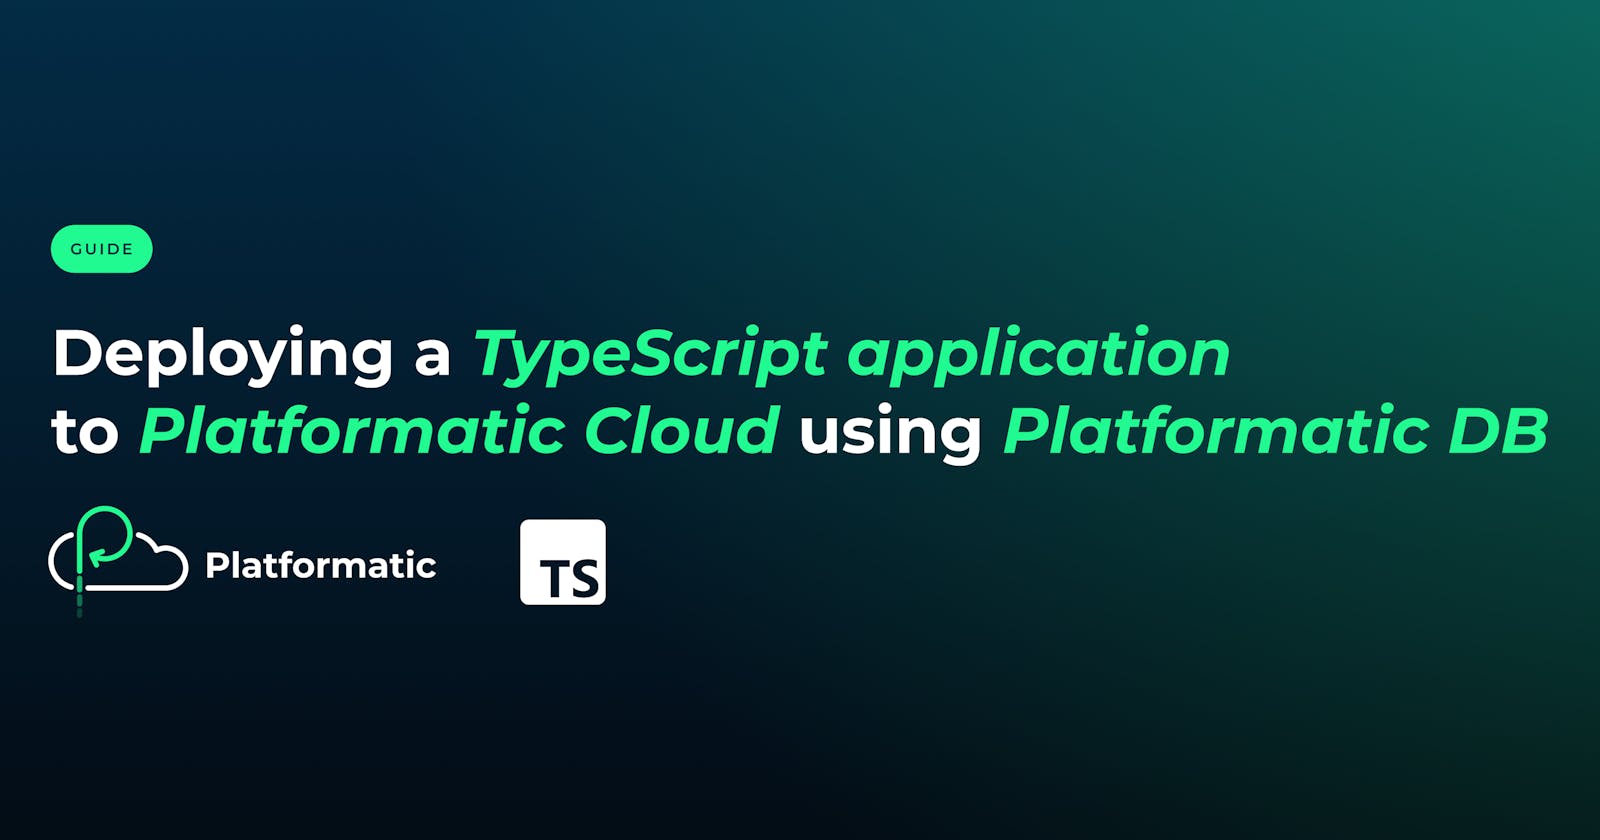 How to Deploy a TypeScript Application to Platformatic Cloud